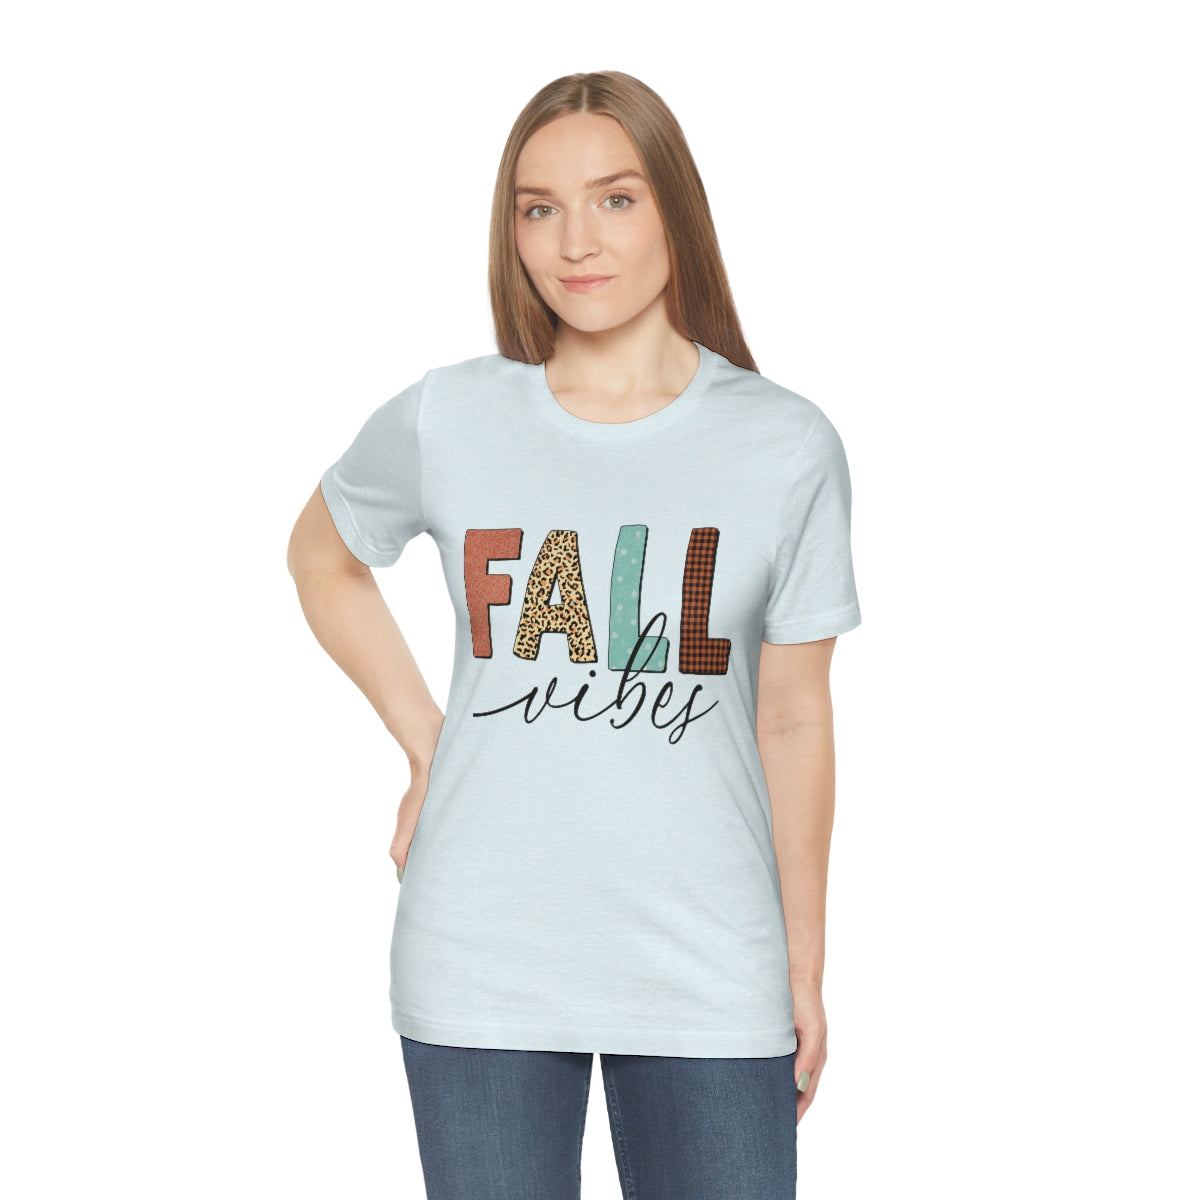 Fall Vibes with Leopard, Polka Dot and Plaid Print Unisex Jersey Short Sleeve Tee S-3XL